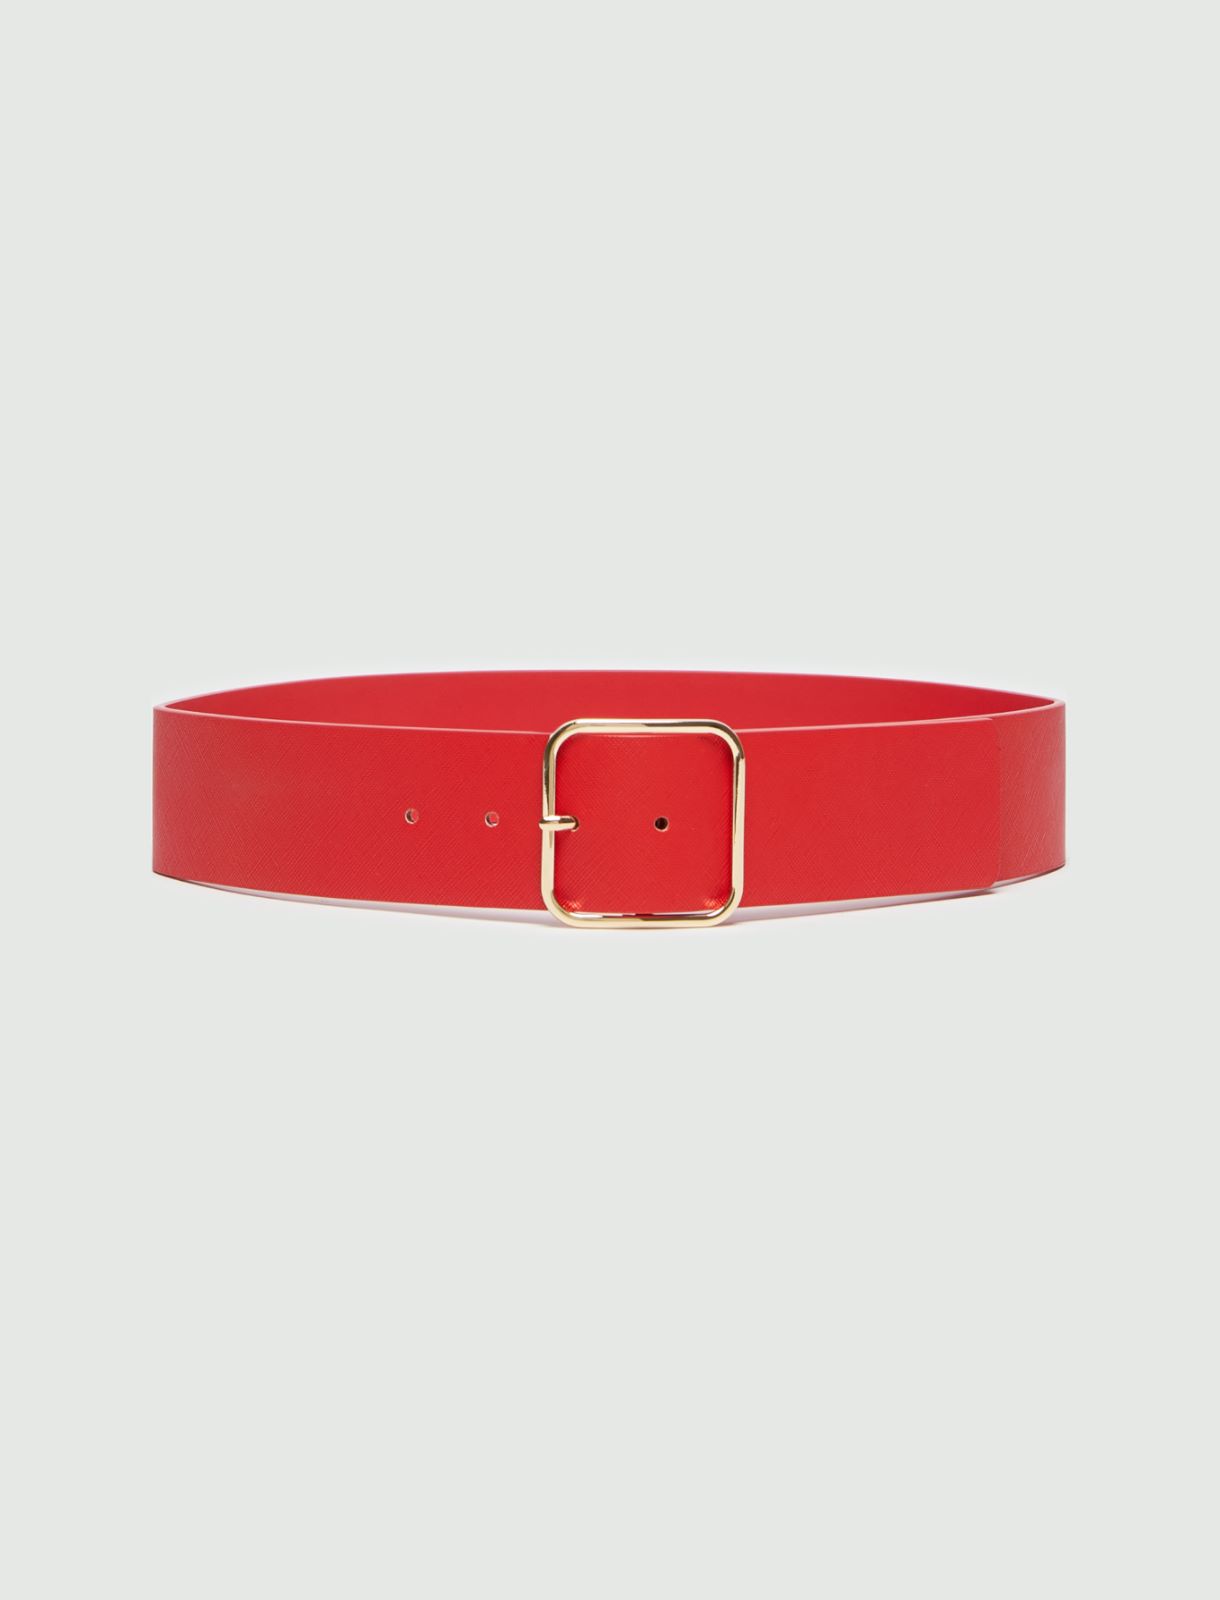 Buckle belt - Red - Persona